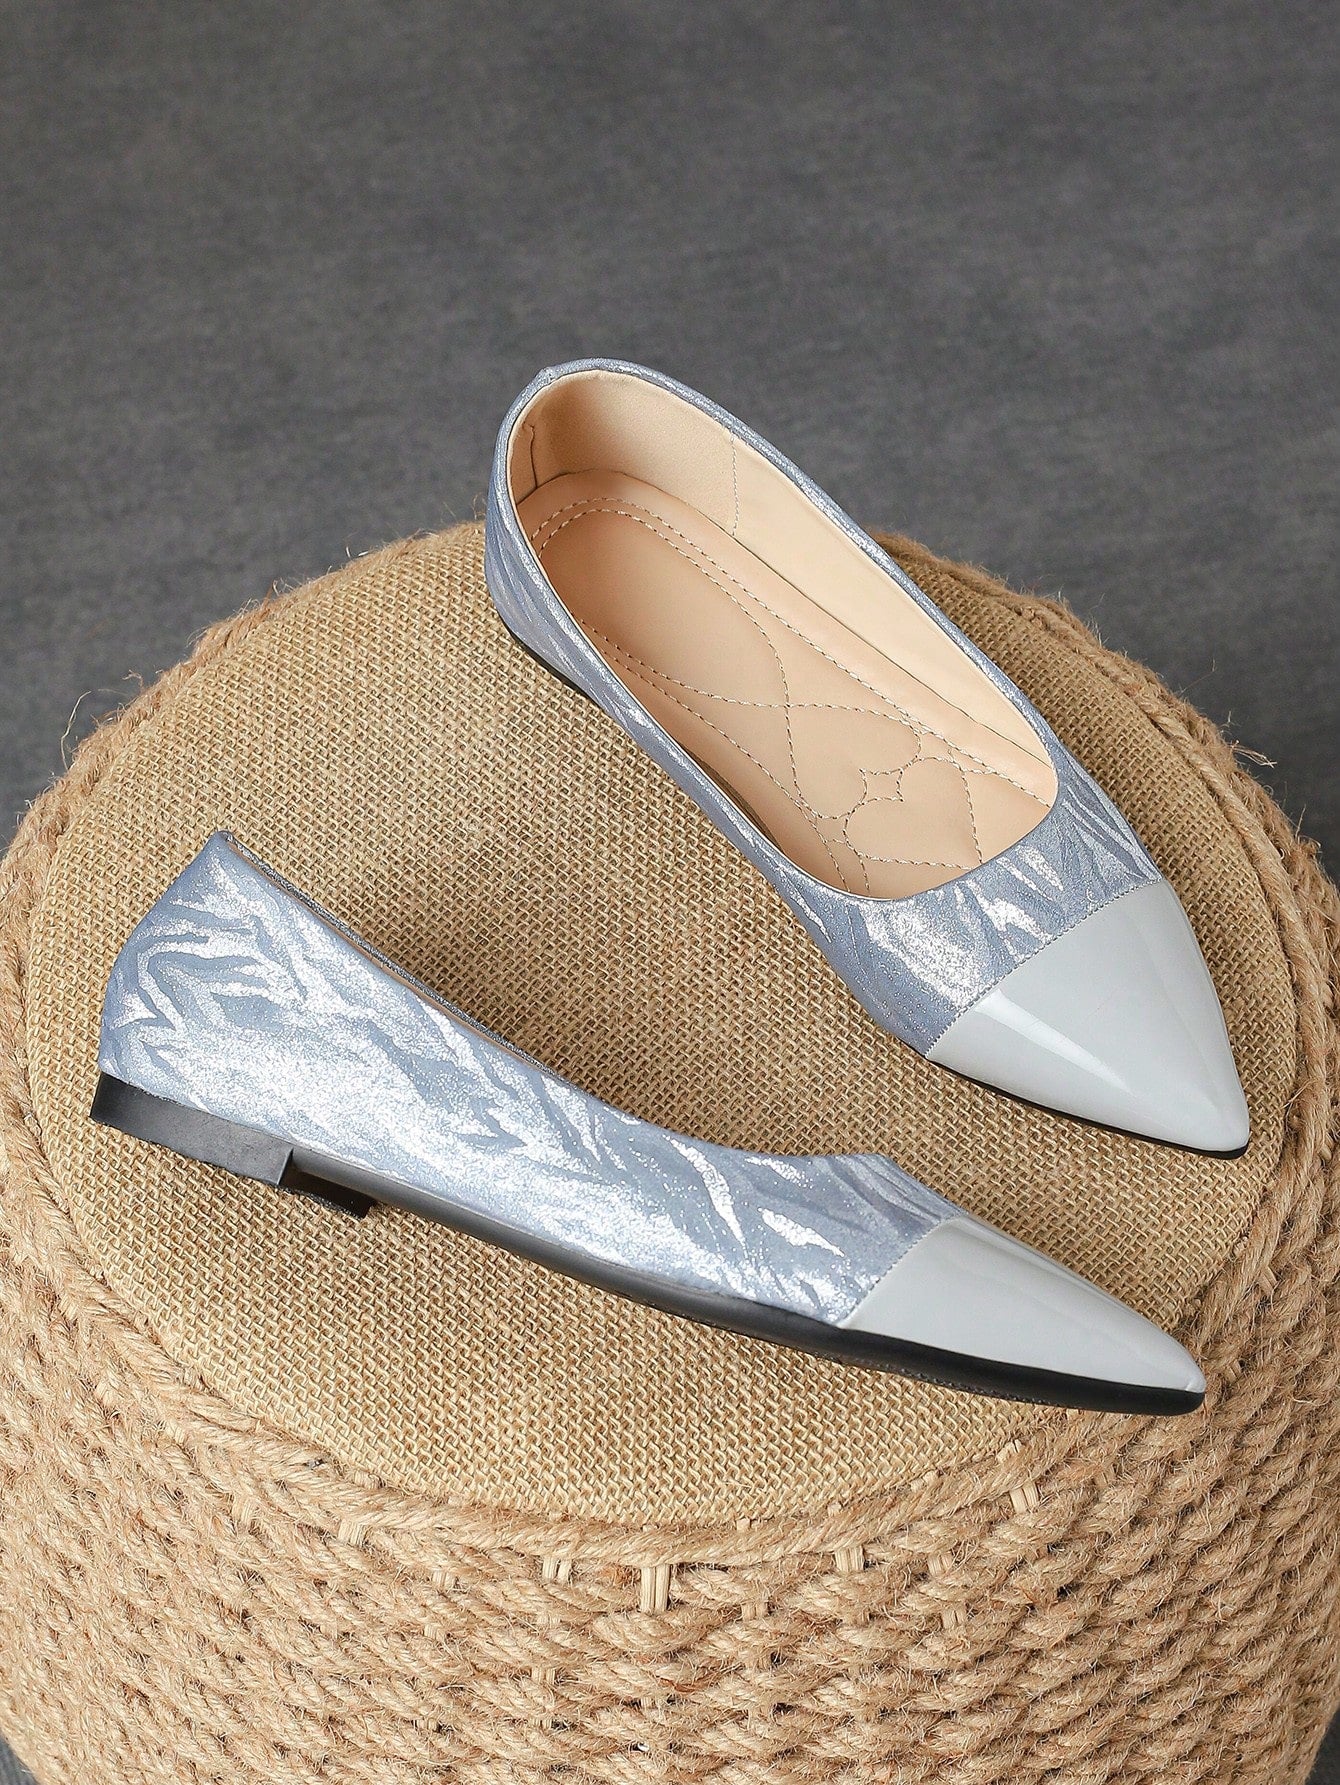 Women's Spliced Pointed Toe Flat Shoes For Daily Commuting, Office Work, Autumn Black Shoes-Grey-2